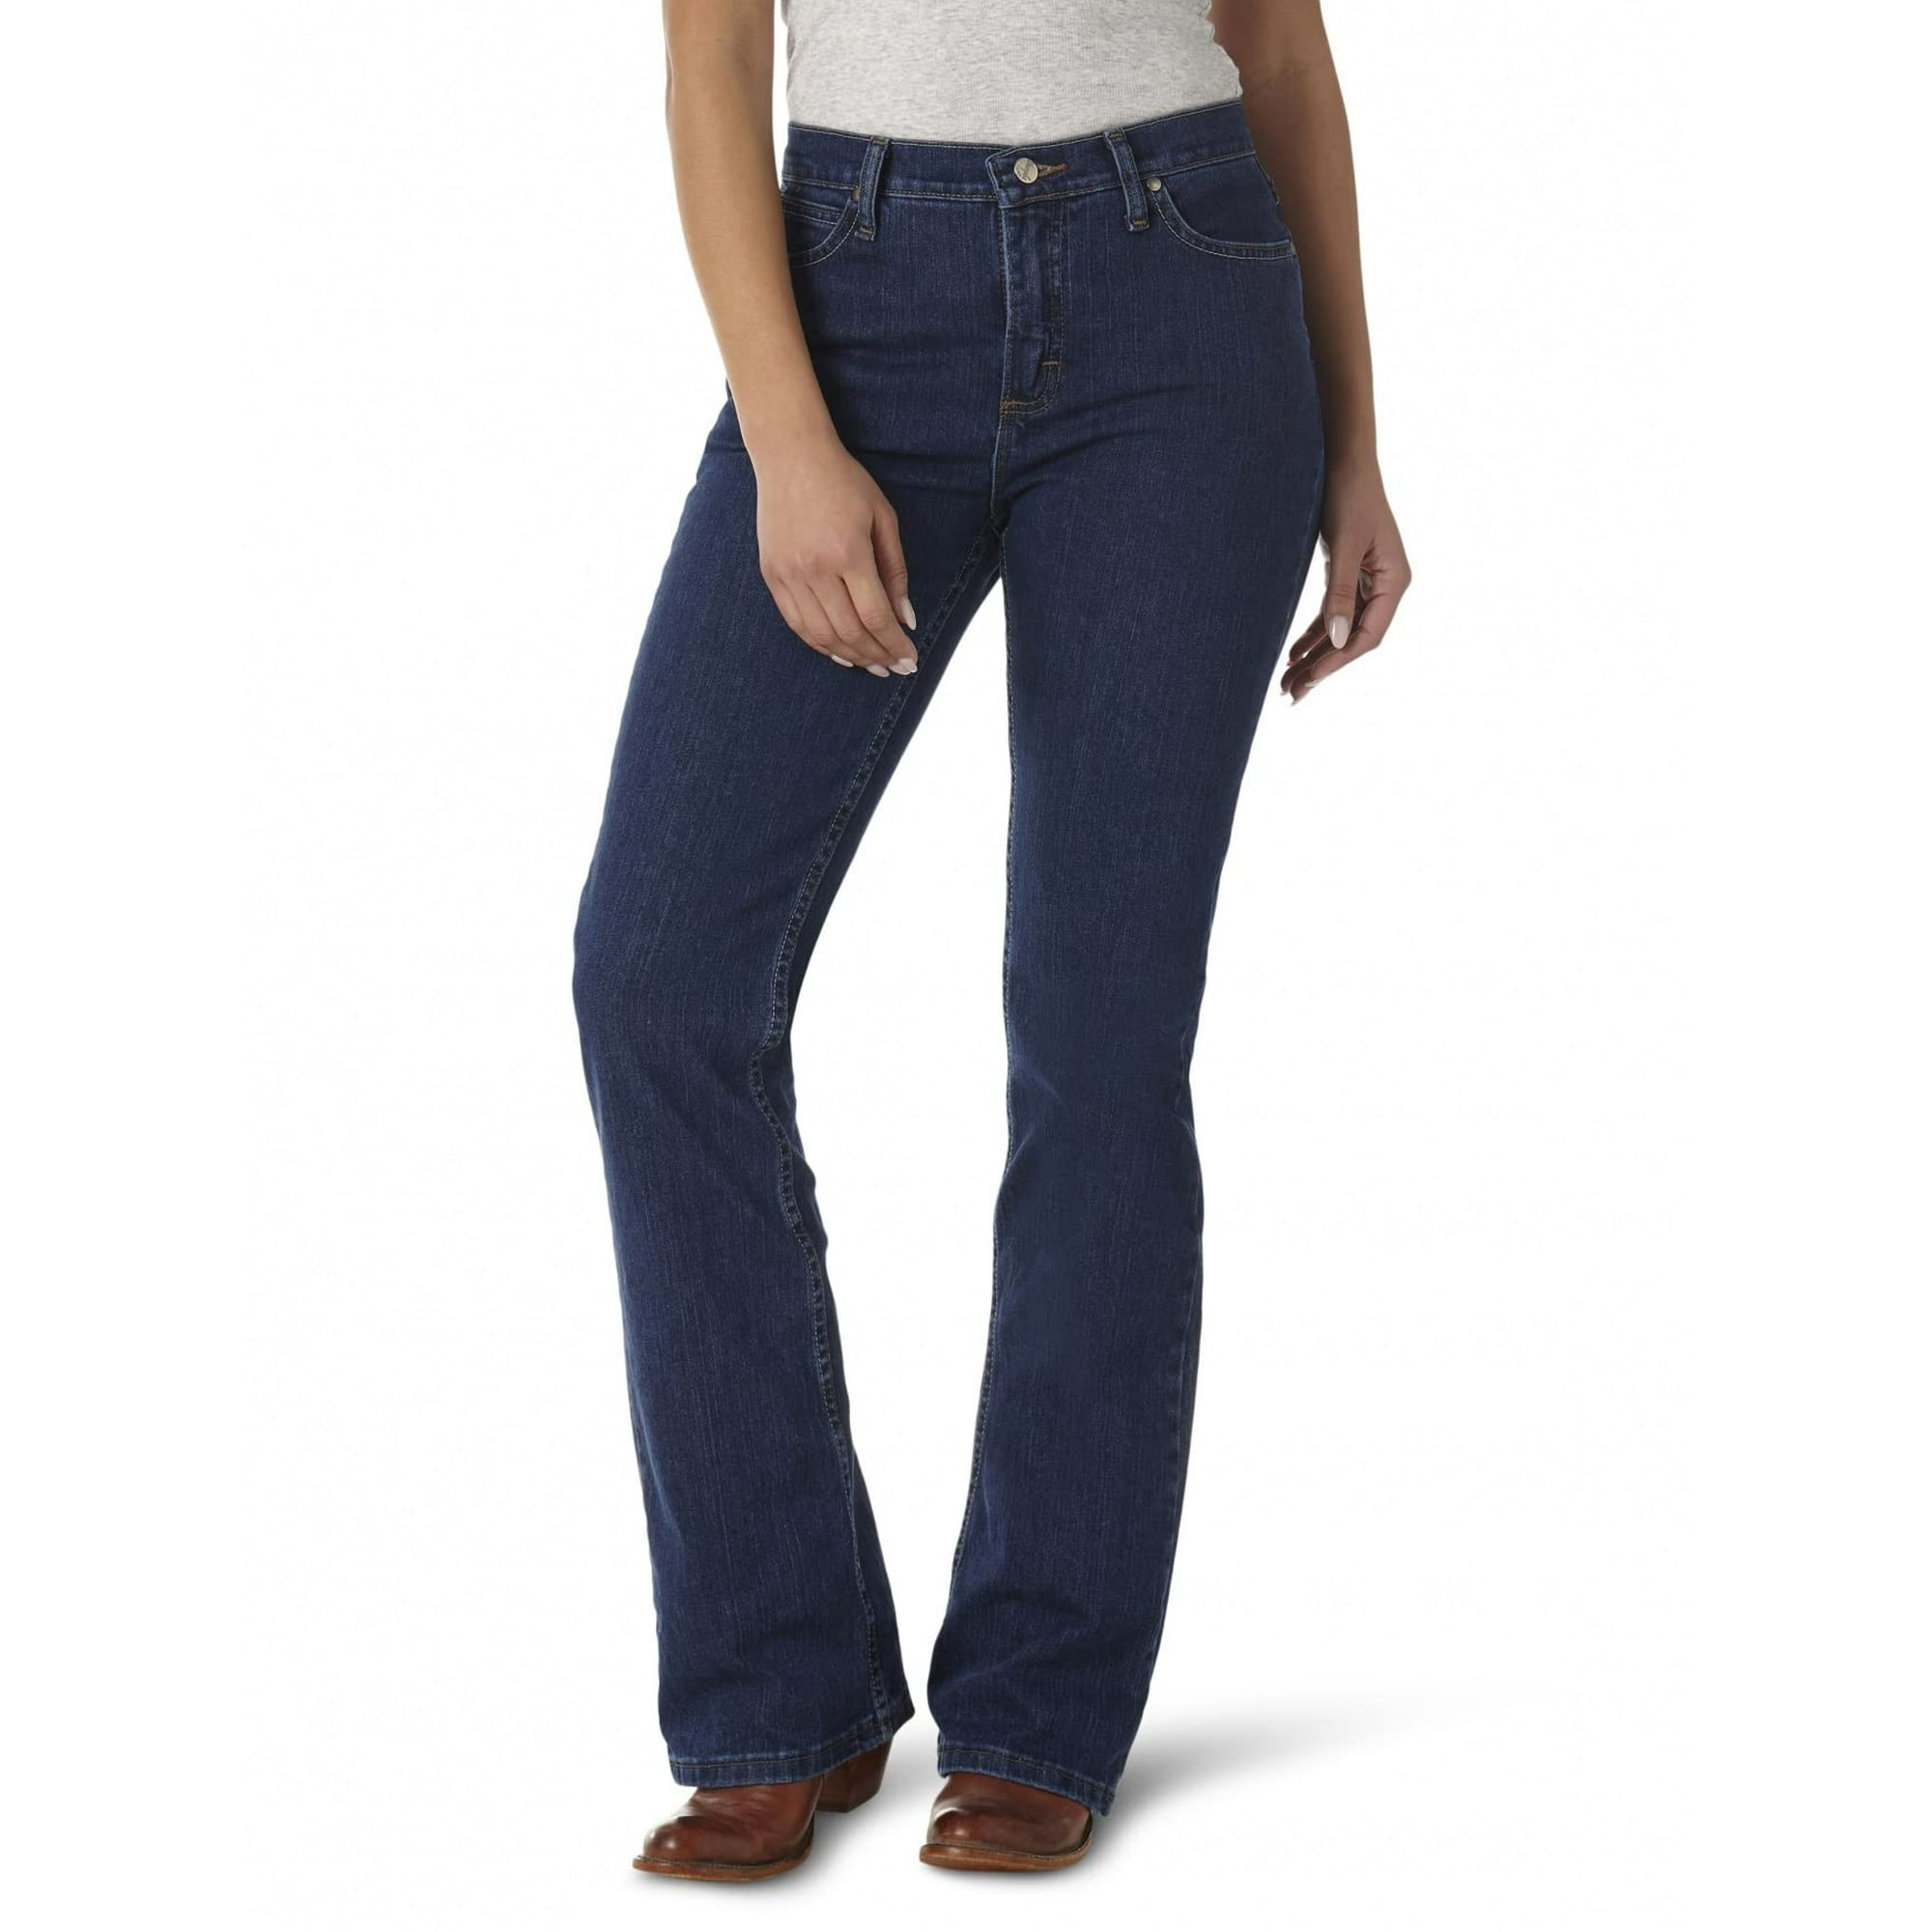 Wrangler Women's As Real As Classic Fit Bot Cut Red Casted Blue Indigo  Jean, Casted Blue Indigo, 14Wx30L | Walmart Canada